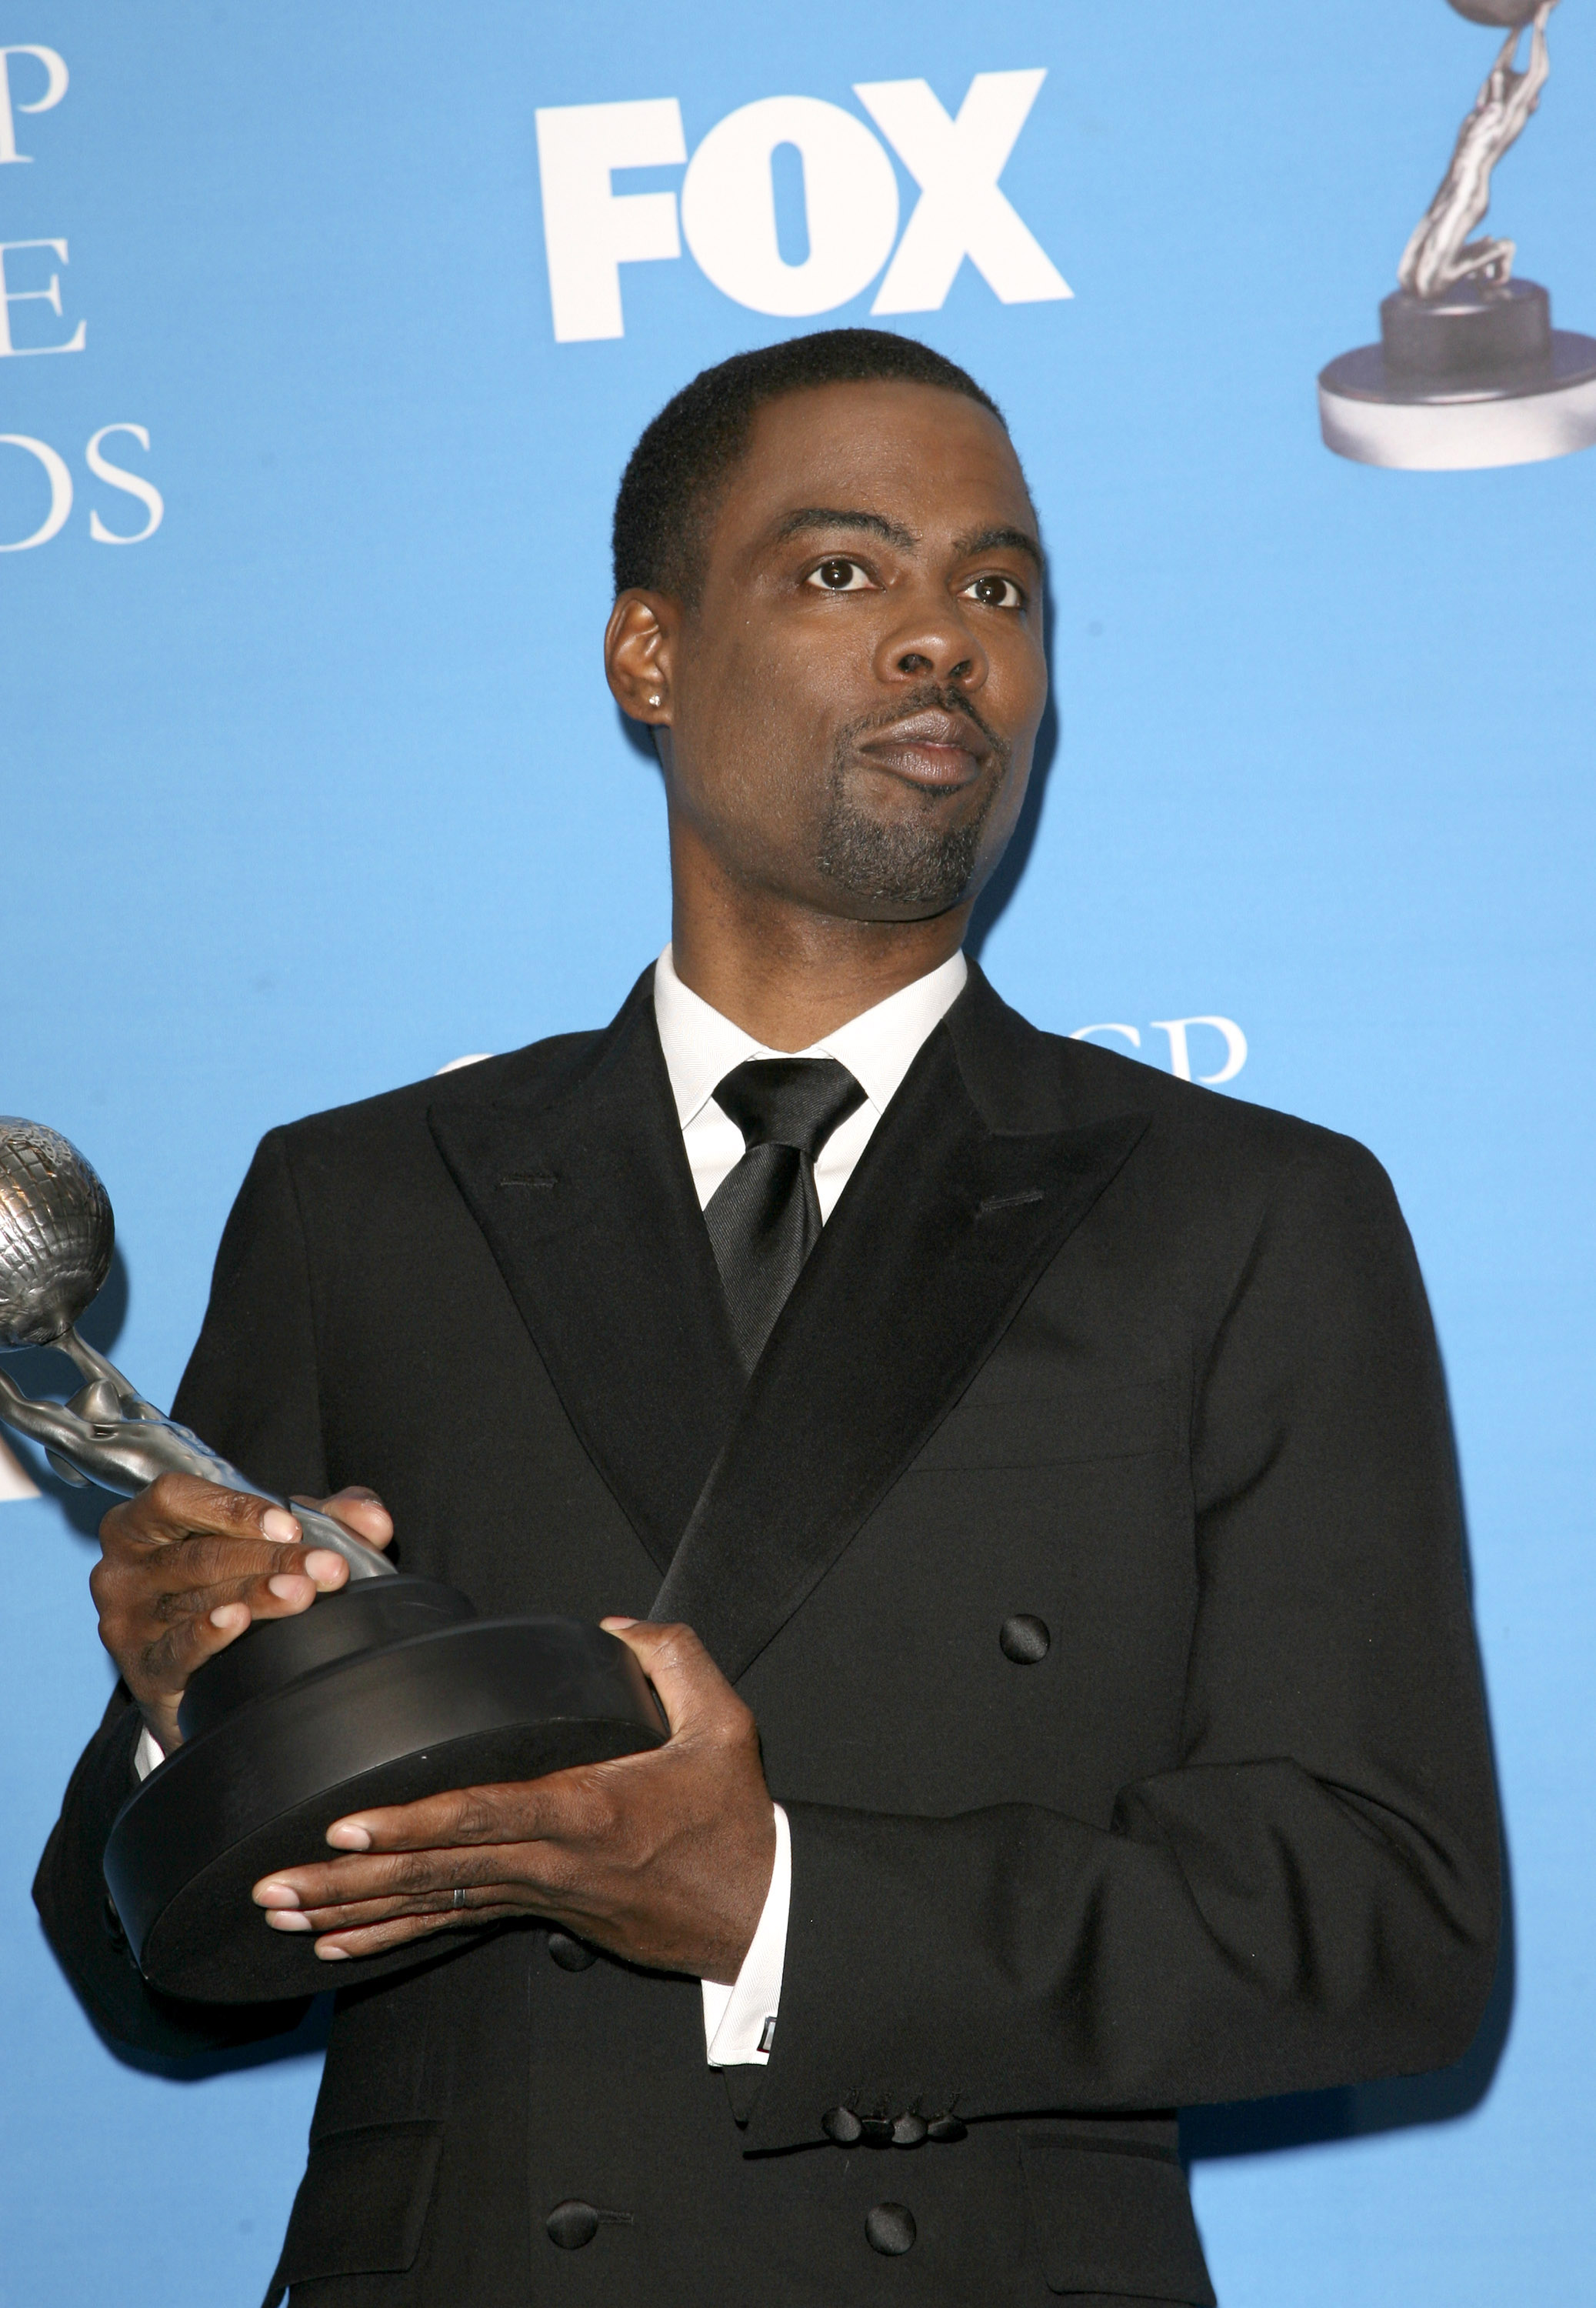 Chris Rock, at the 37th Annual NAACP Image Awards on February 25, 2006. | Source: Getty Images